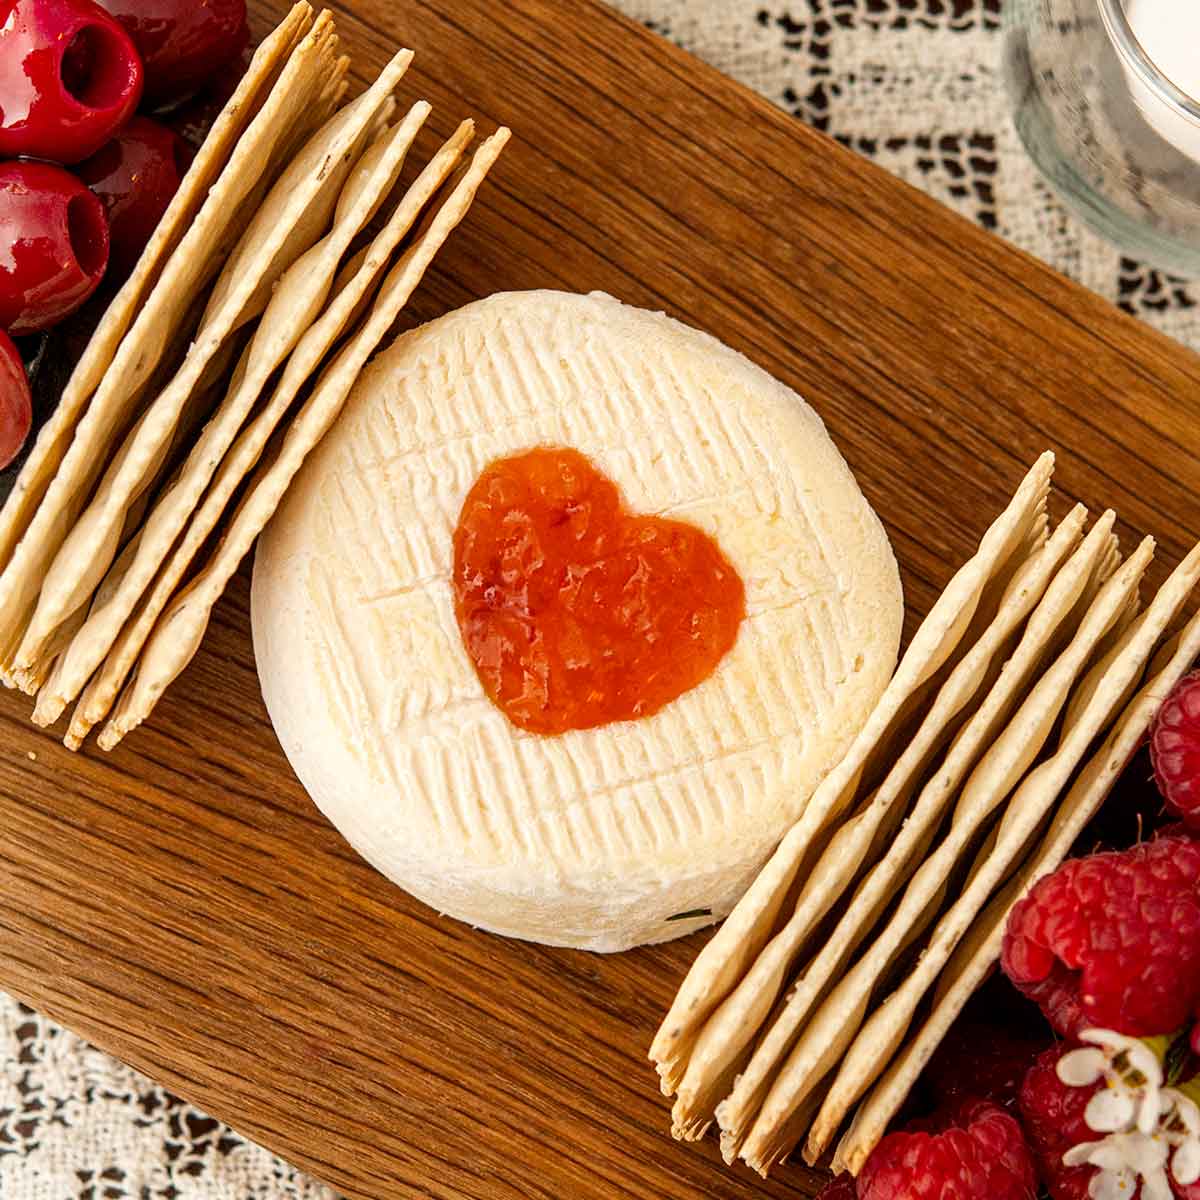 A heart of preserves cut into cheese on a board beside 2 stacks of crackers on a lace tablecloth.